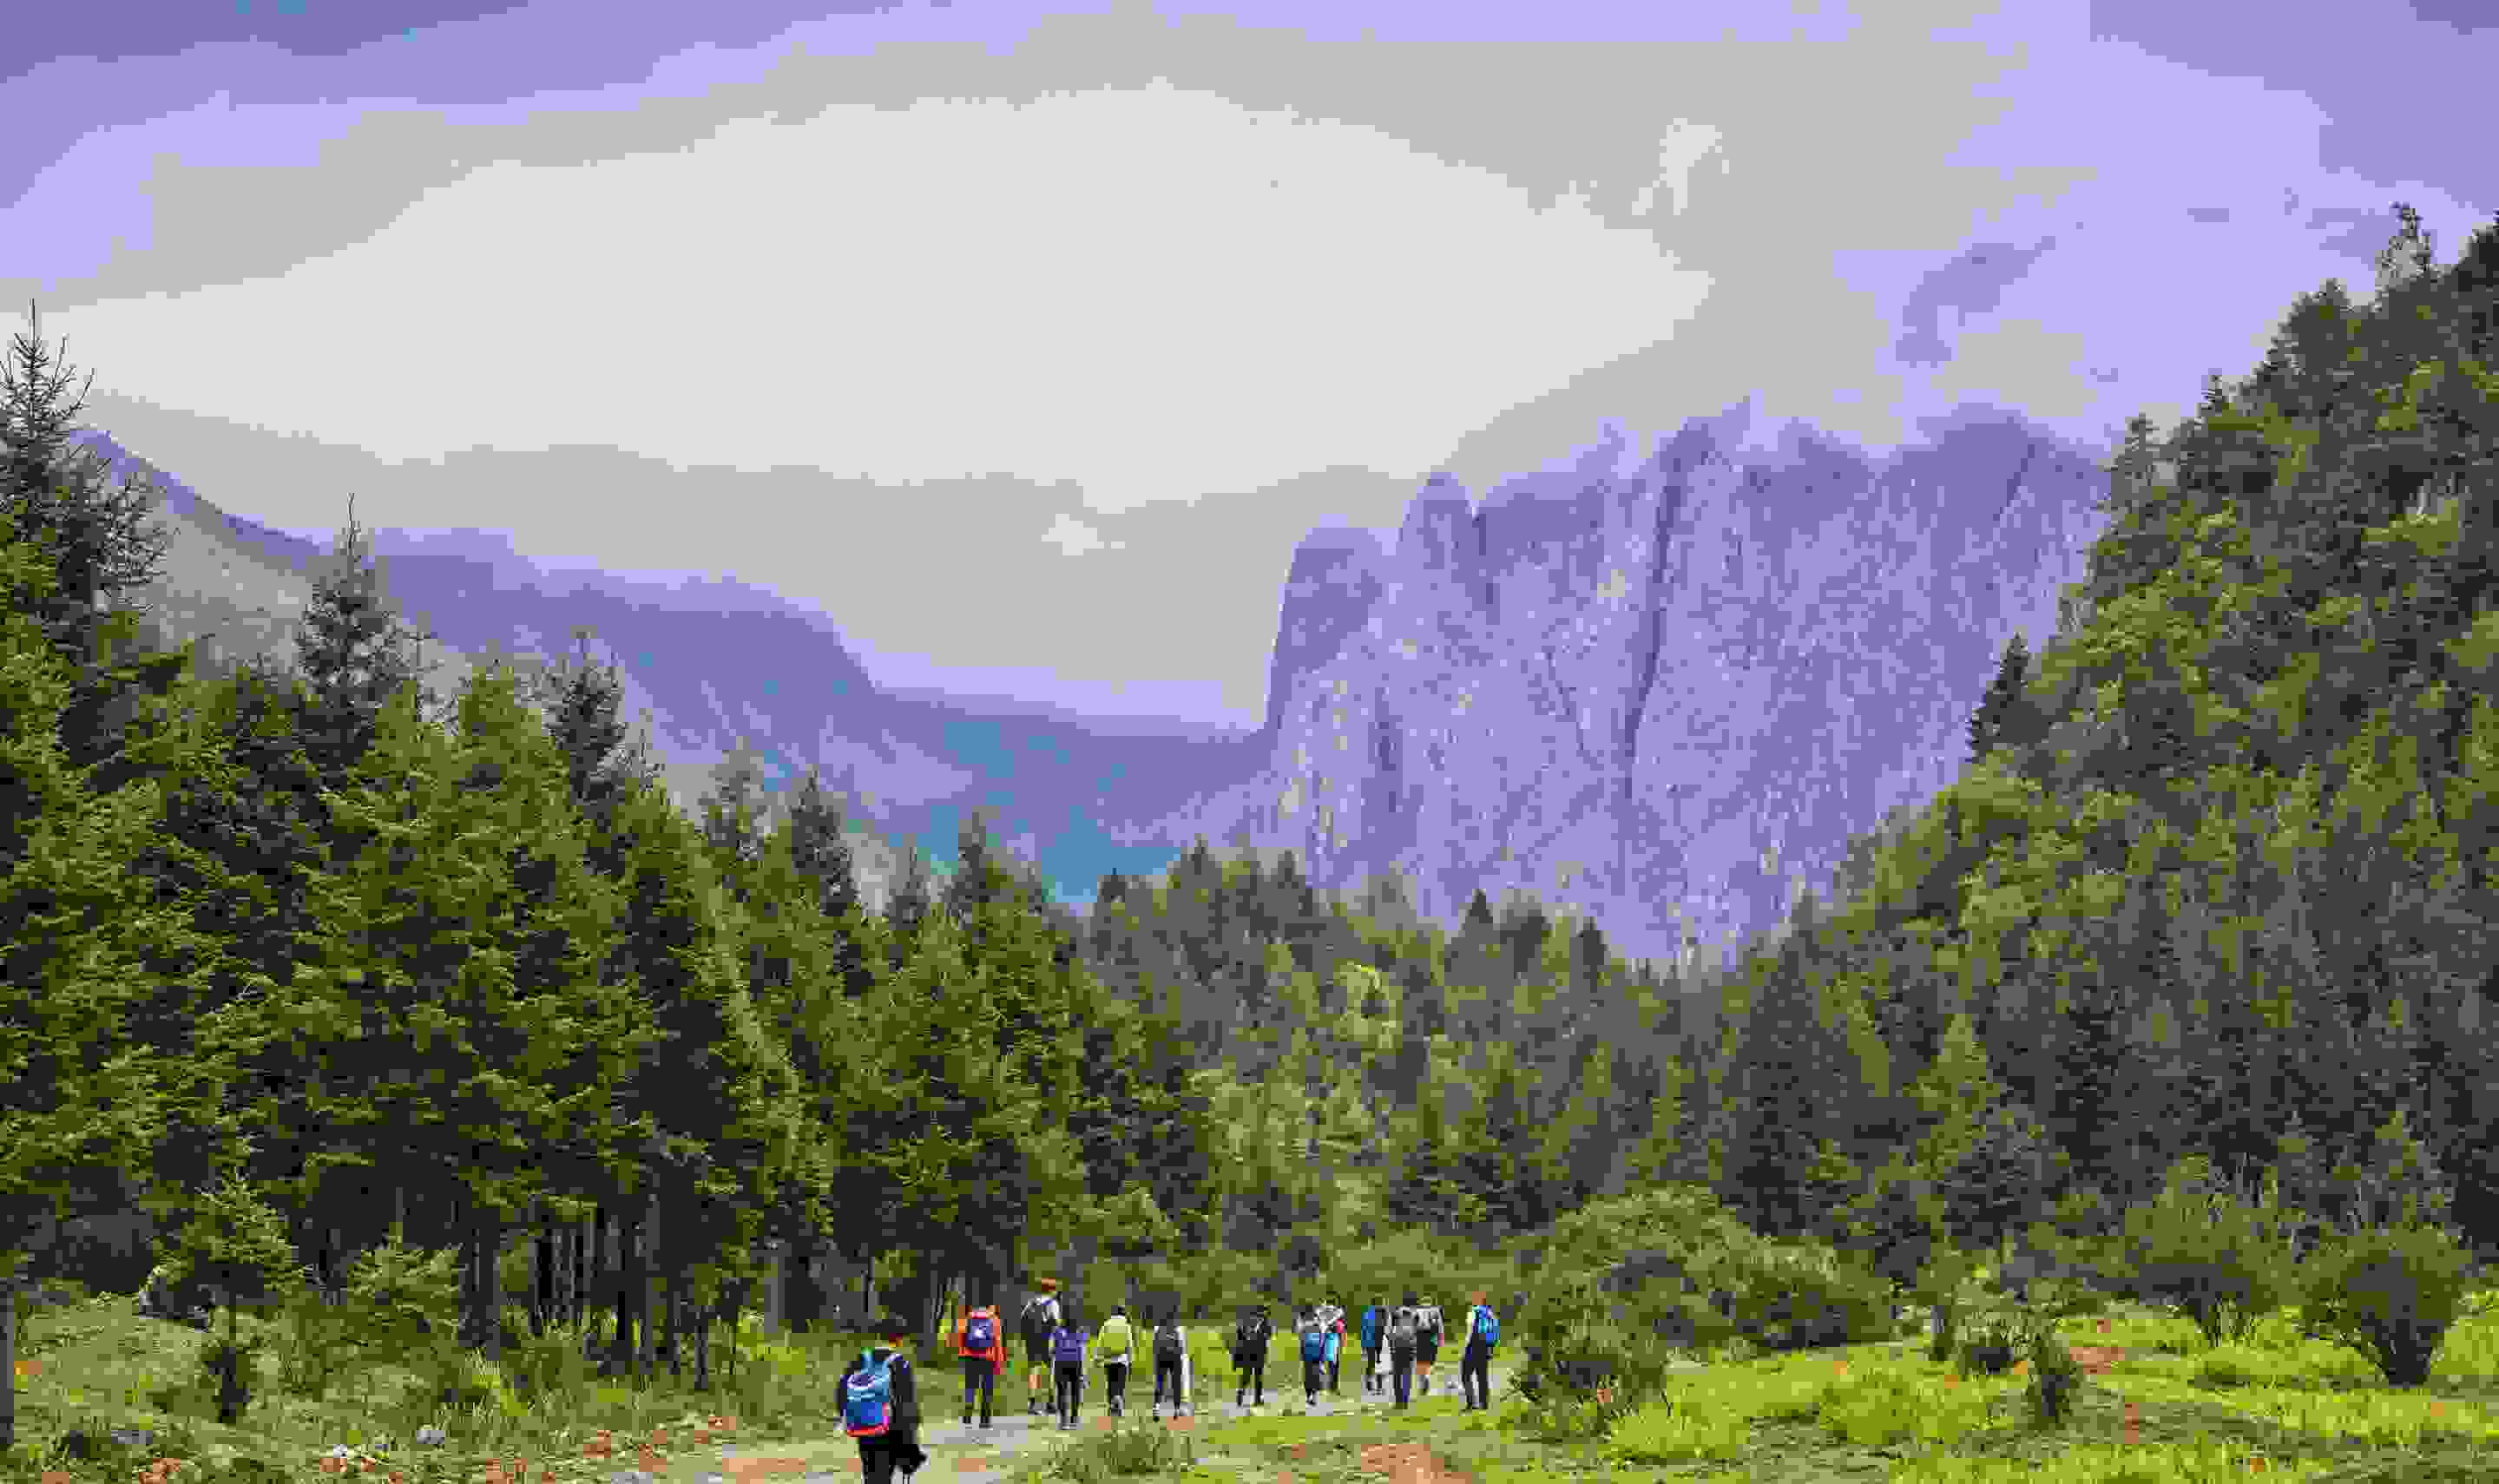 Hiking group with mountains